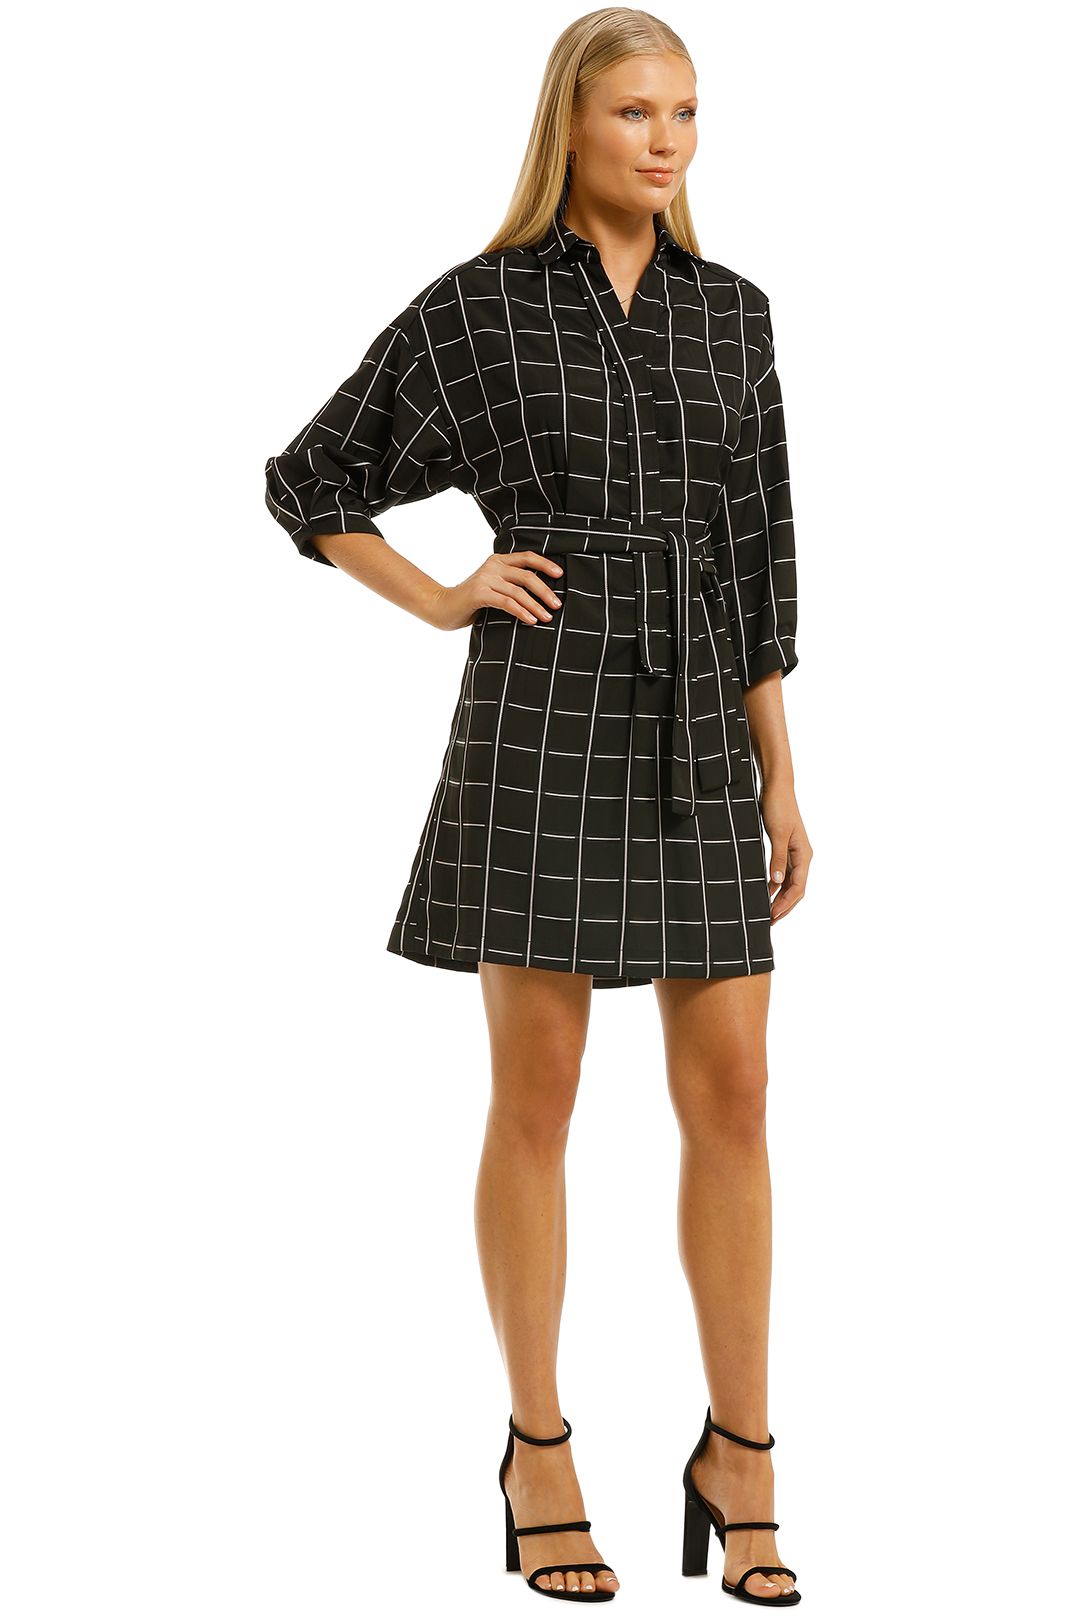 Liberty Shirt Dress in Check by Cooper St for Hire | GlamCorner